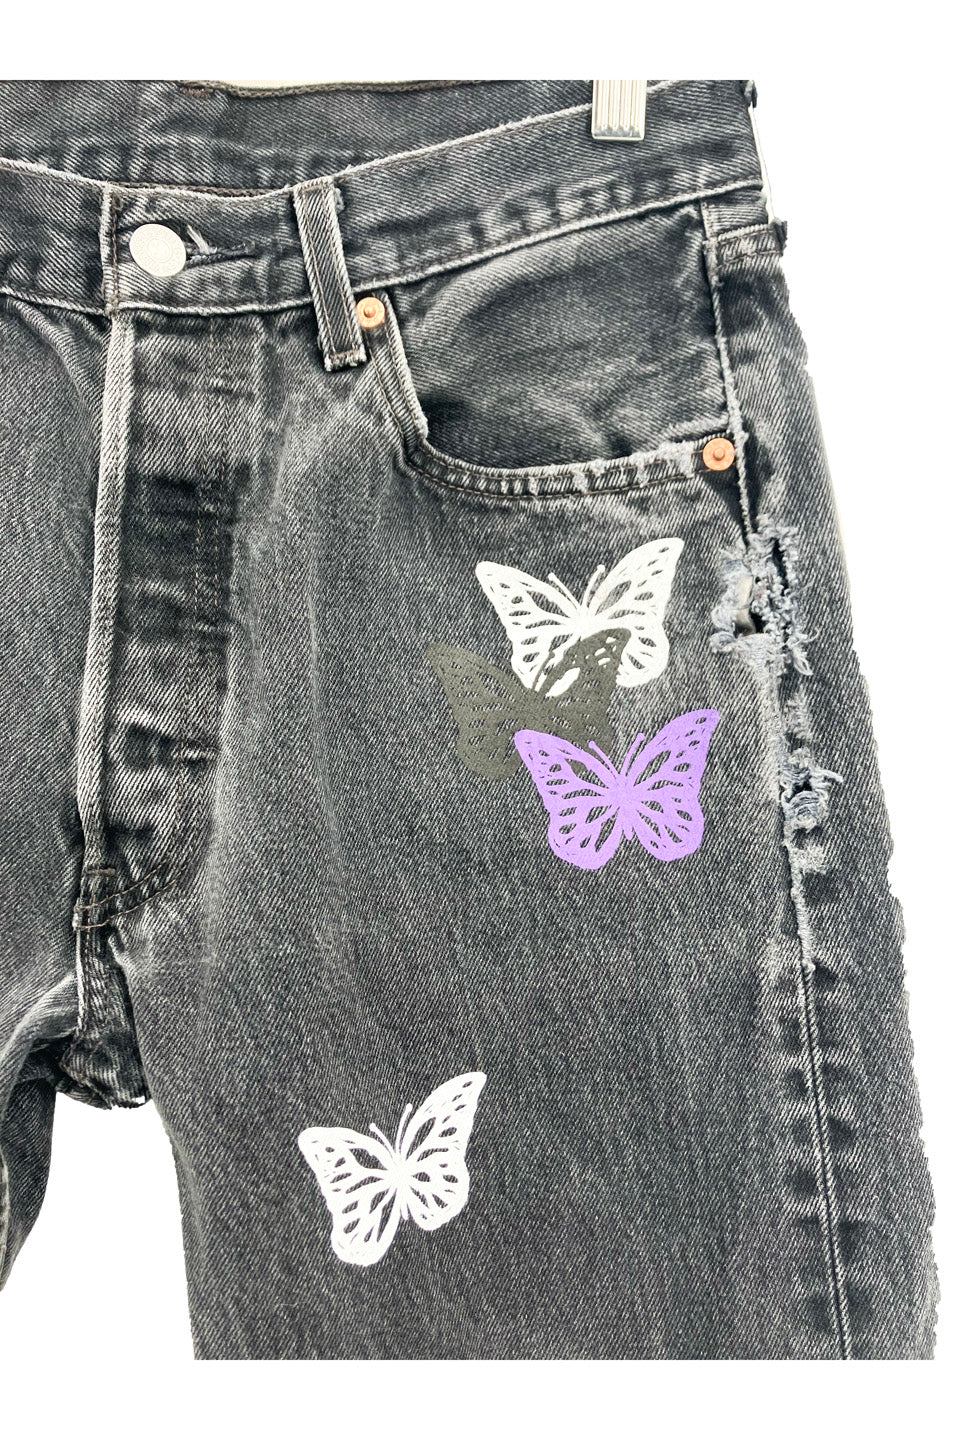 About Dreams x Levi's 501 Butterfly Denim アバウトドリームズ 